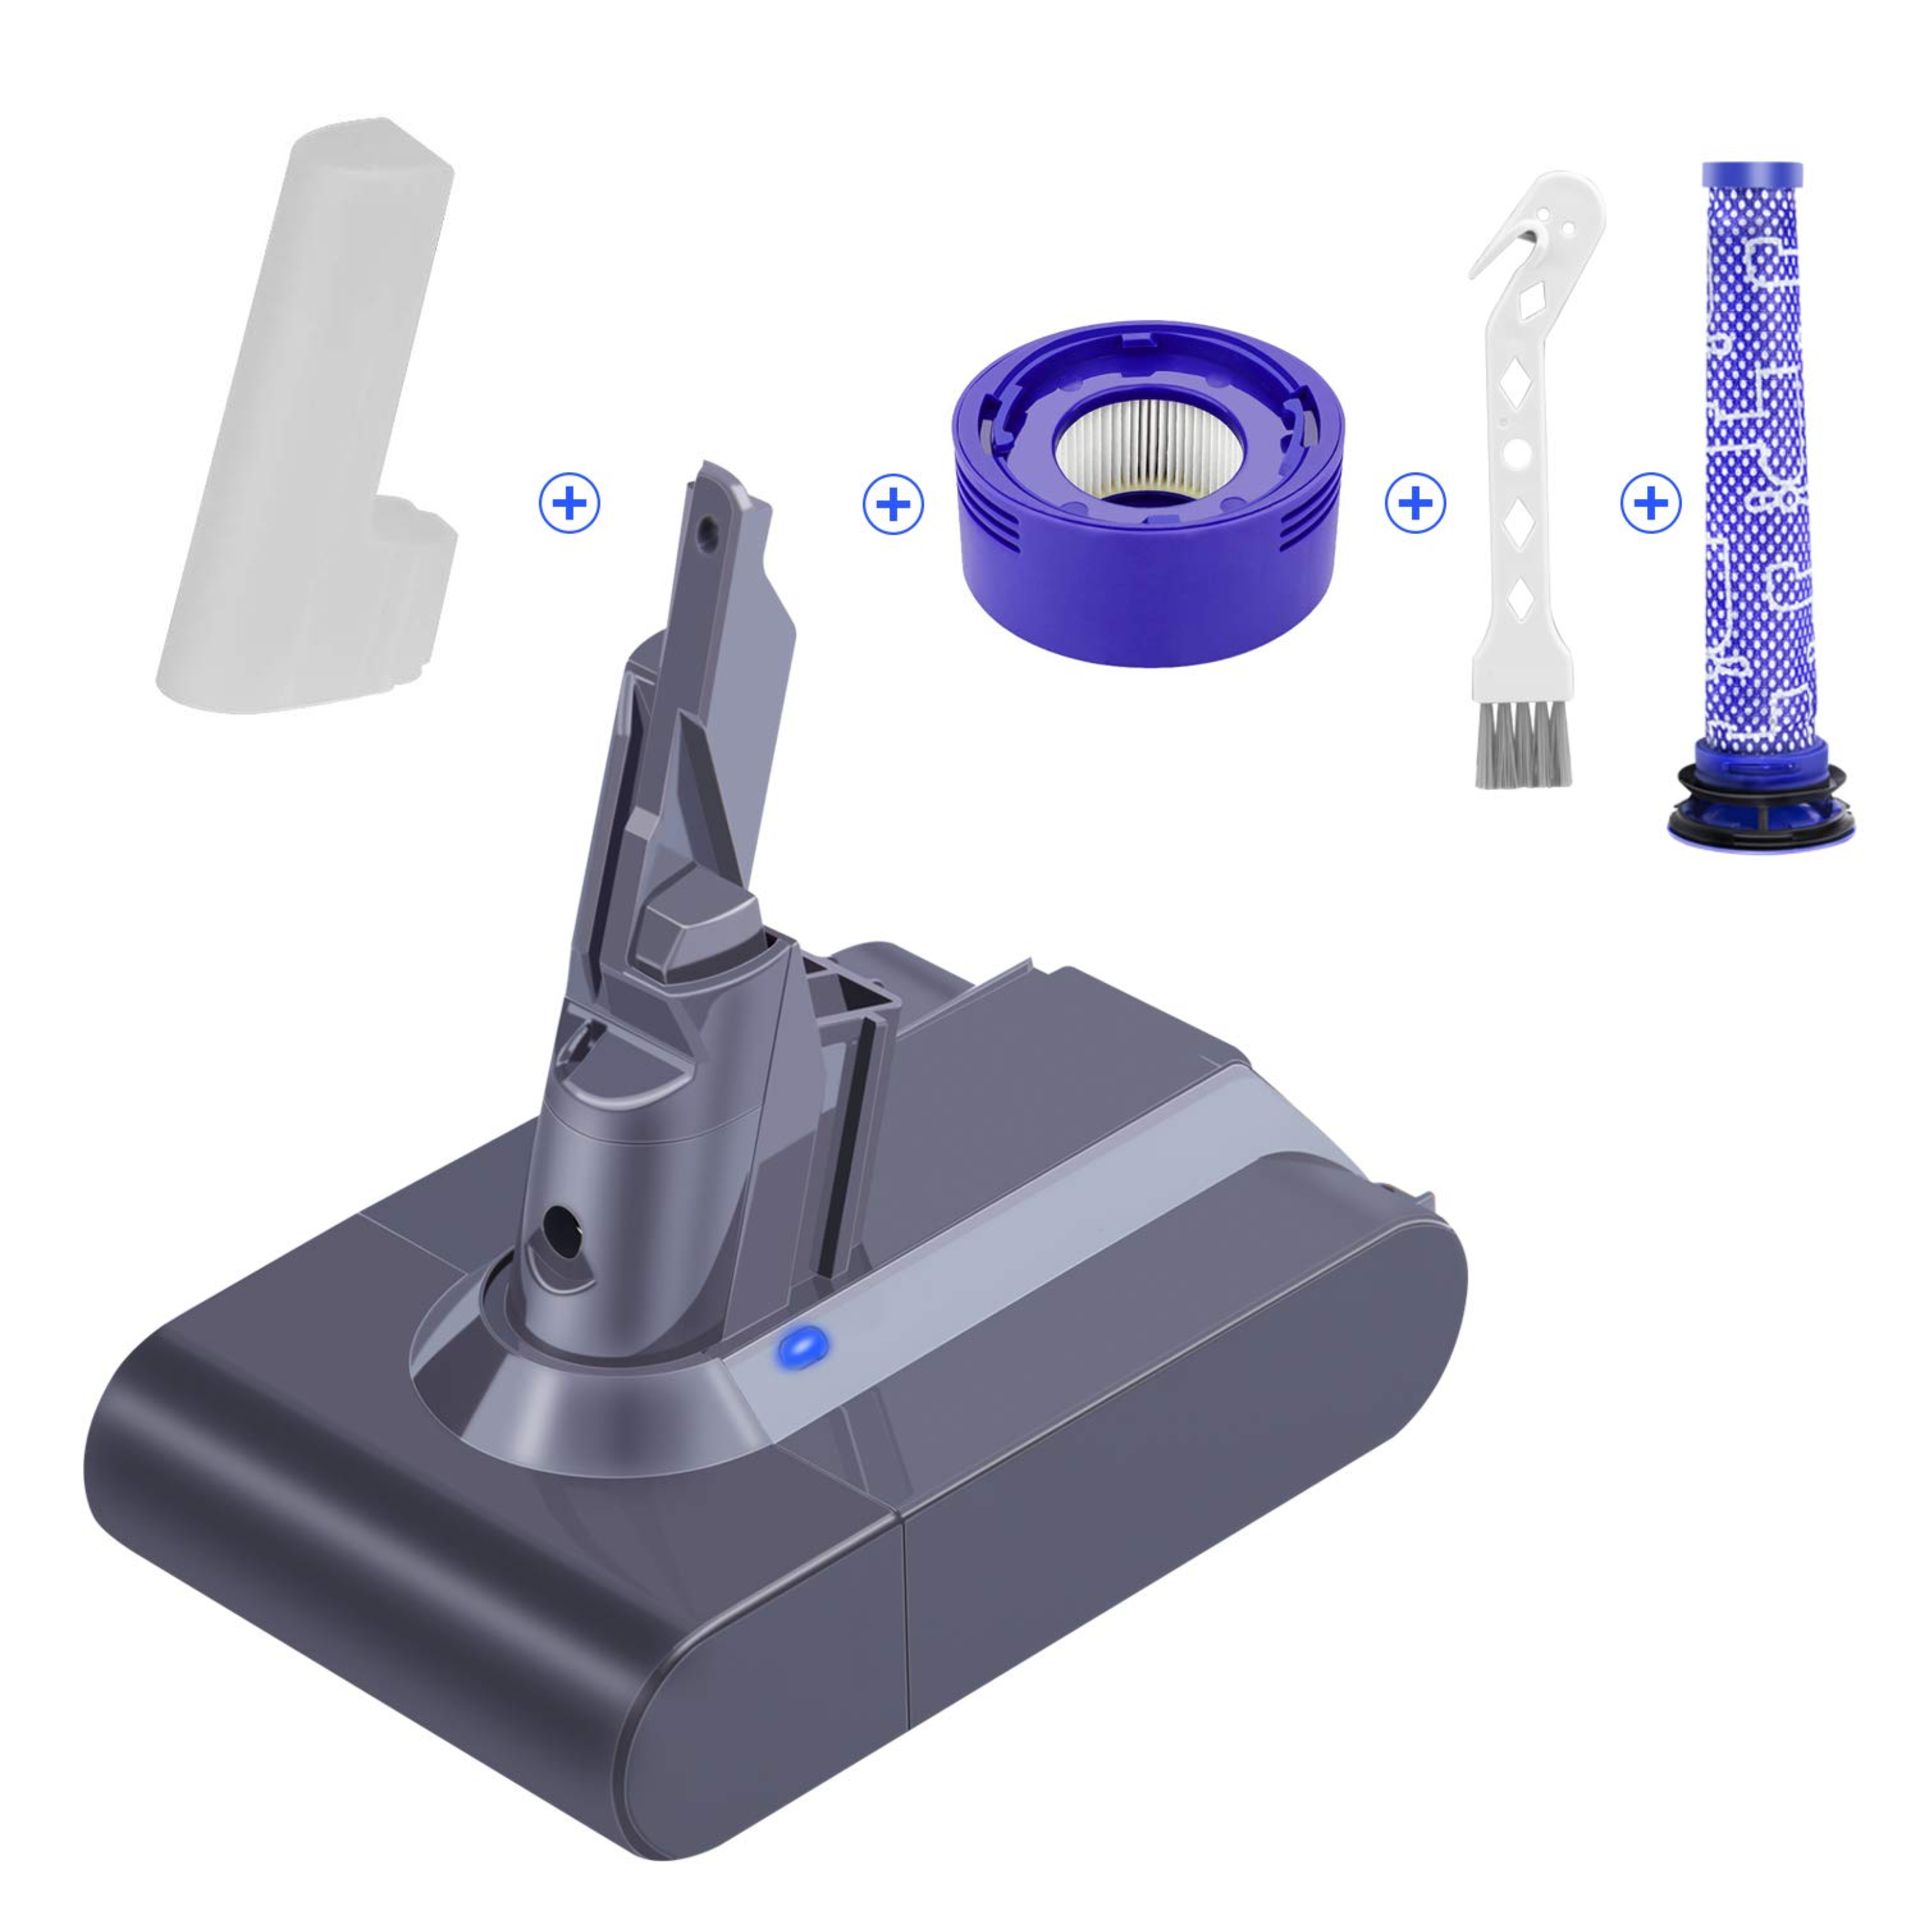 RRP £70.26 Total, Lot Consisting of 3 Items - See Description.